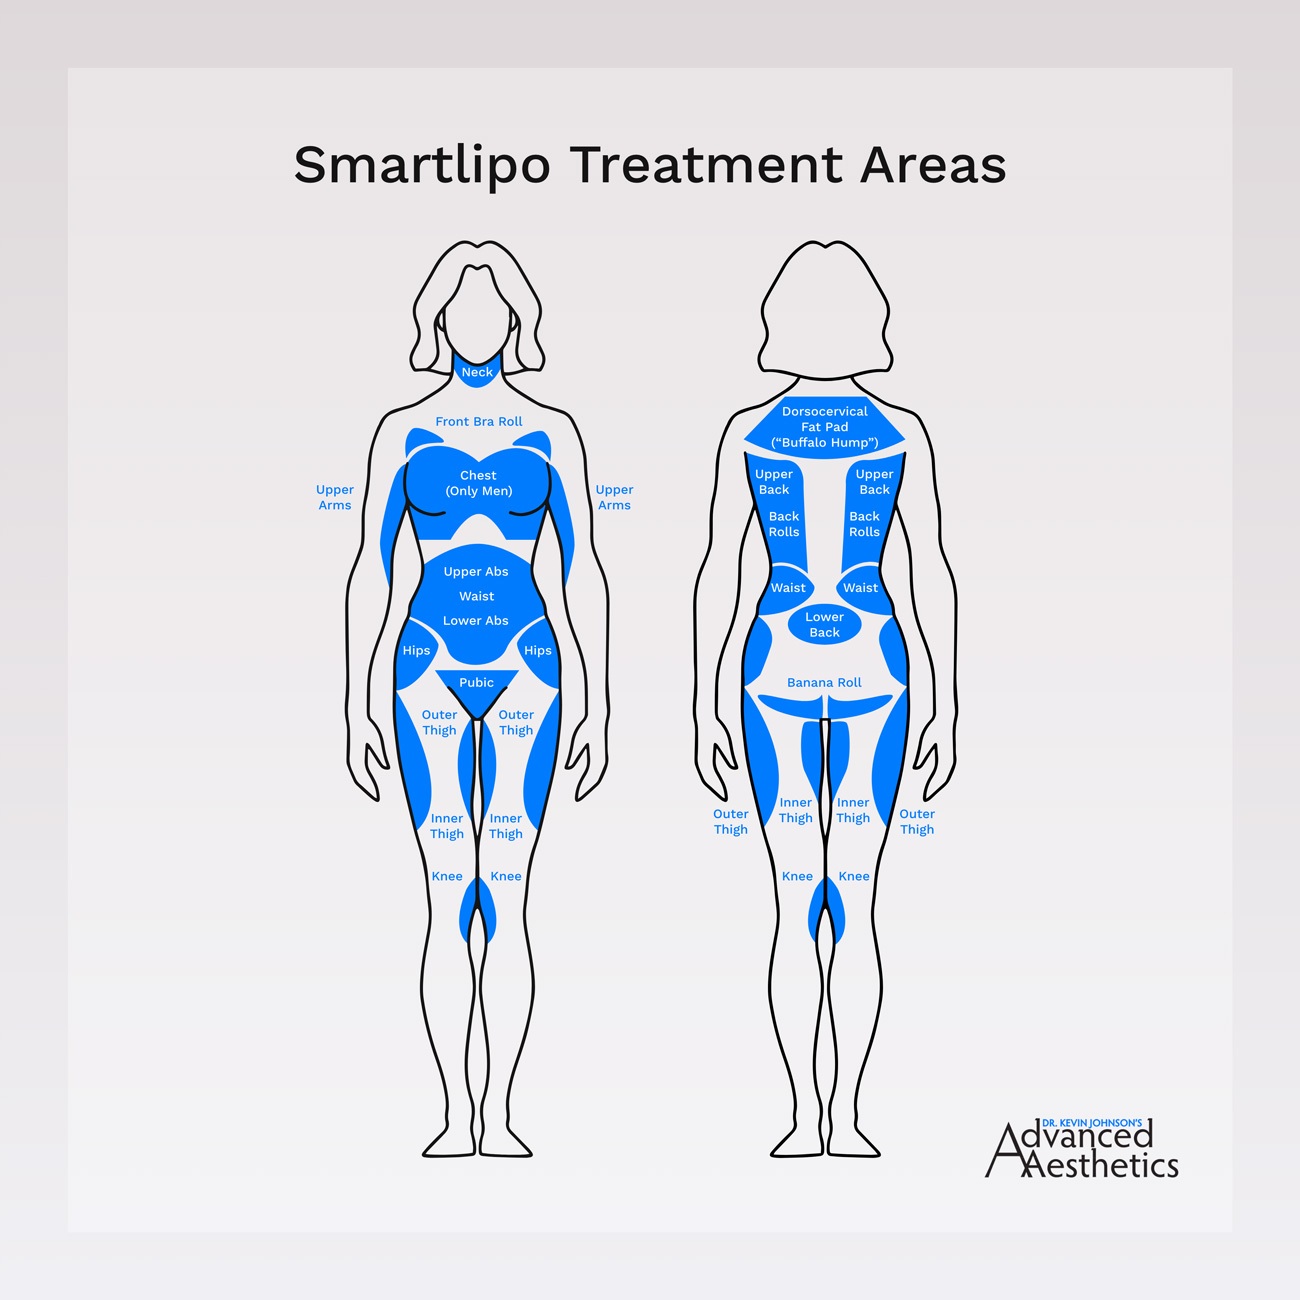 Smartlipo treatment areas for neck, upper arms, back, chest, abdomen, flanks, thighs, knees